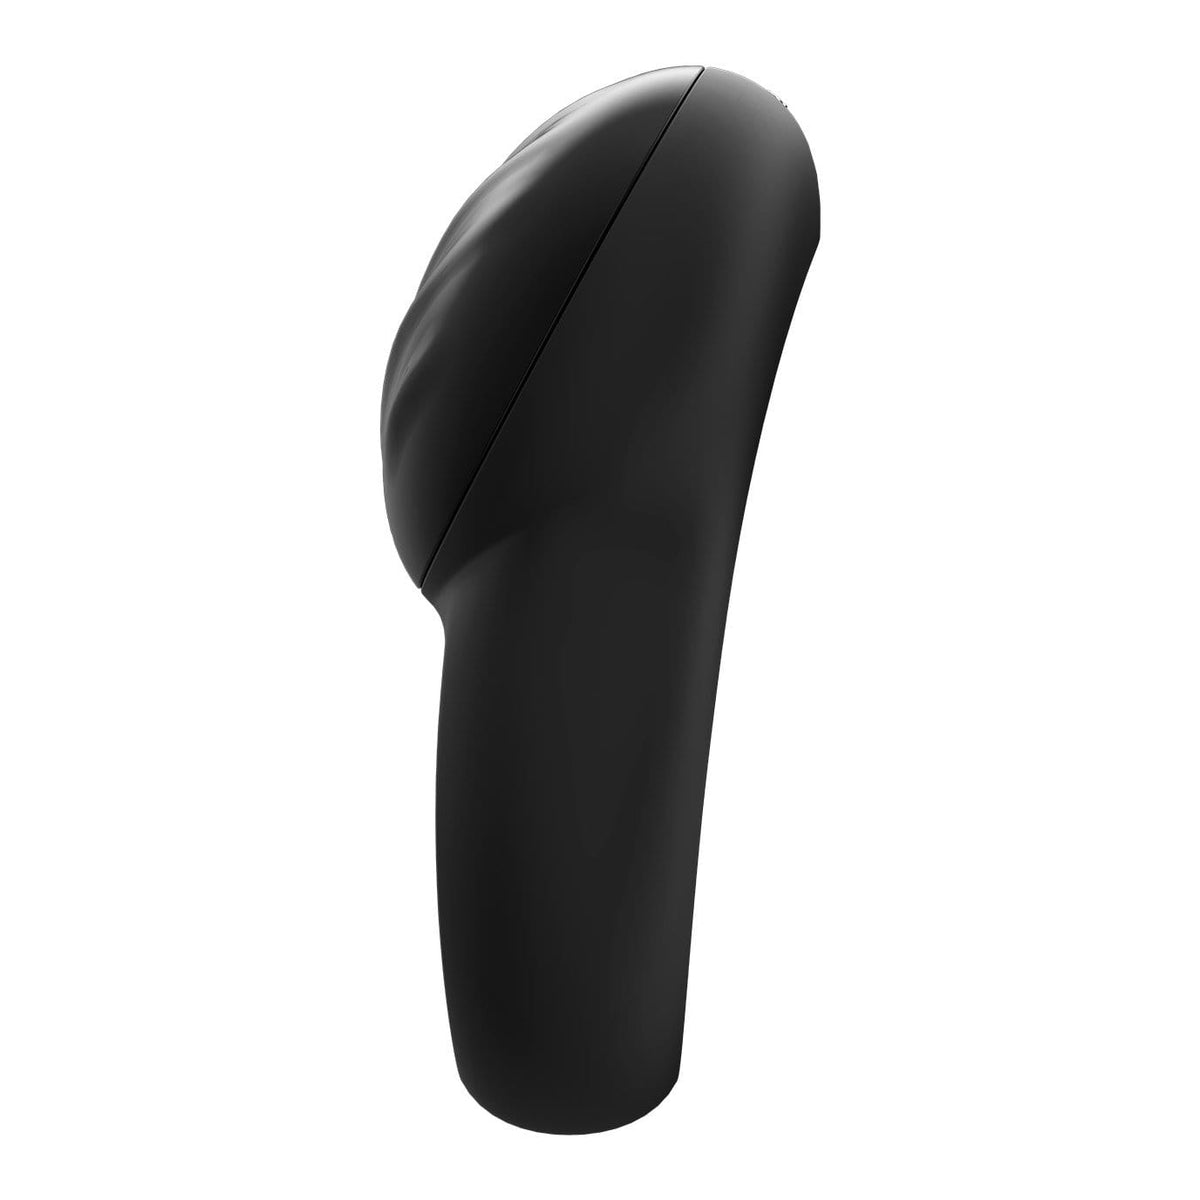 Satisfyer - Signet Ring App-Controlled Bluetooth Cock Ring (Black) Remote Control Cock Ring (Vibration) Rechargeable 4061504002002 CherryAffairs